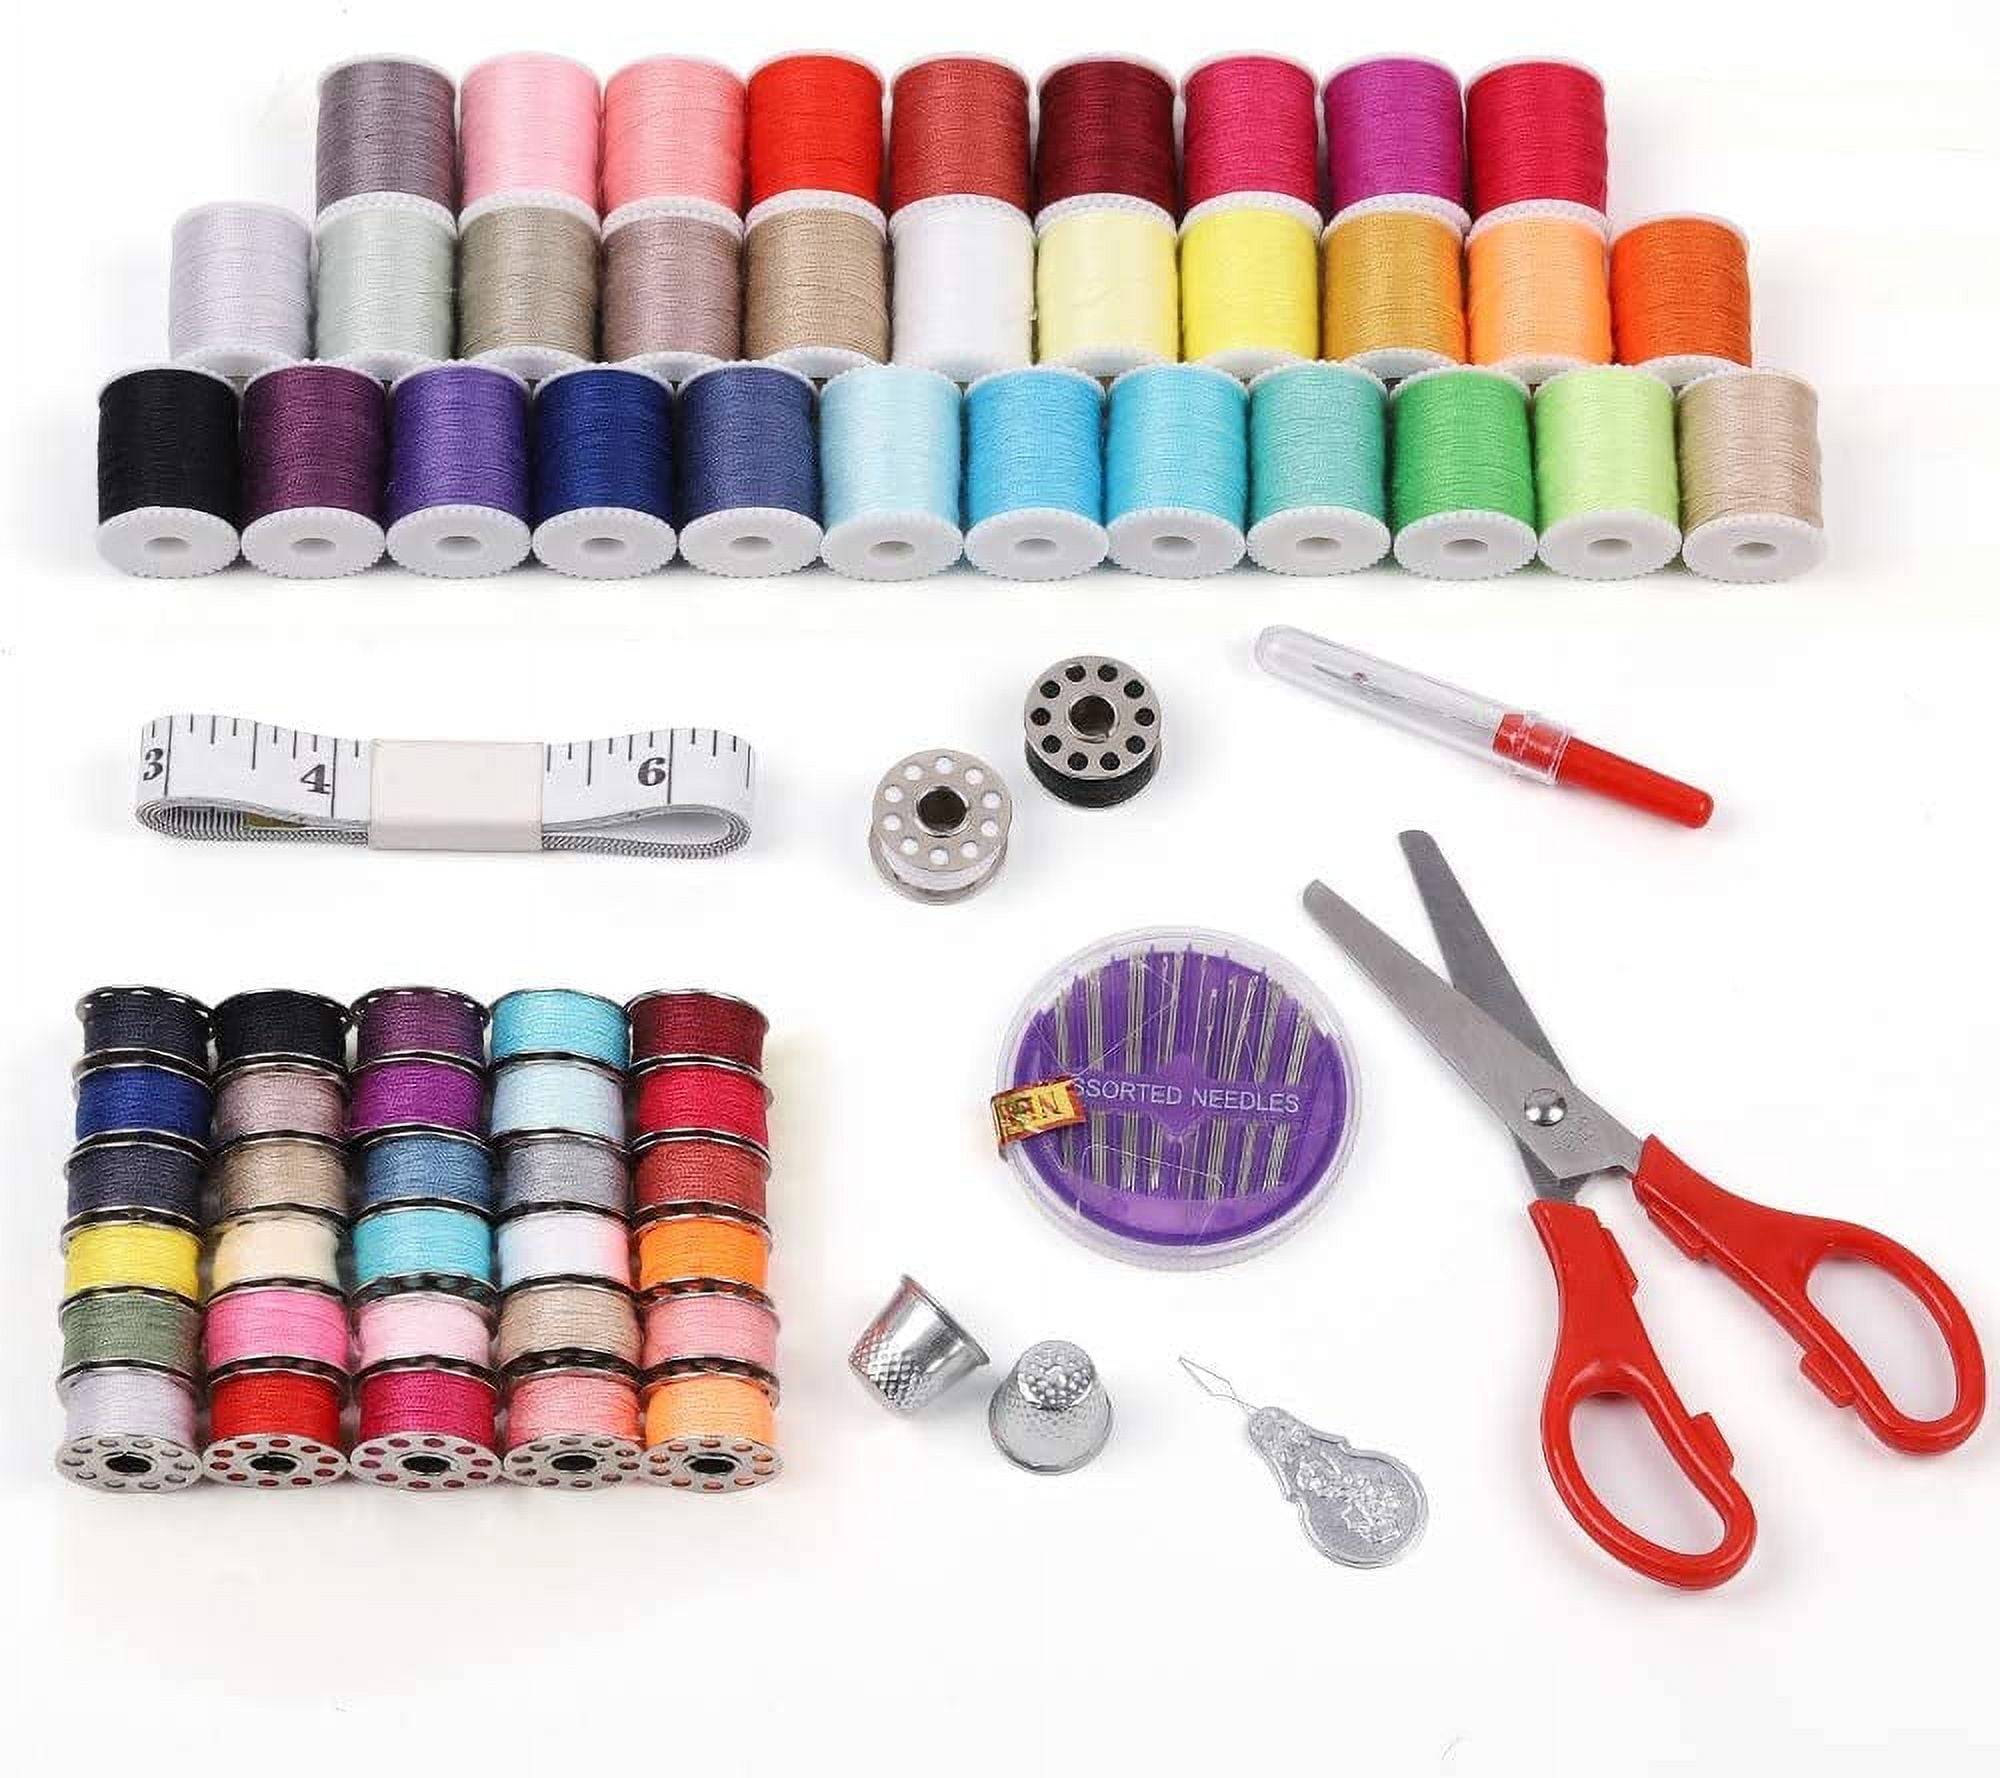 Eleaeleanor Clearance Sale 90 Pcs Premium Sewing Kit, Sewing Kit for Adults Include Sewing Box, Sewing Needles, Thread Spools, Sewing Supplies and Accessories for